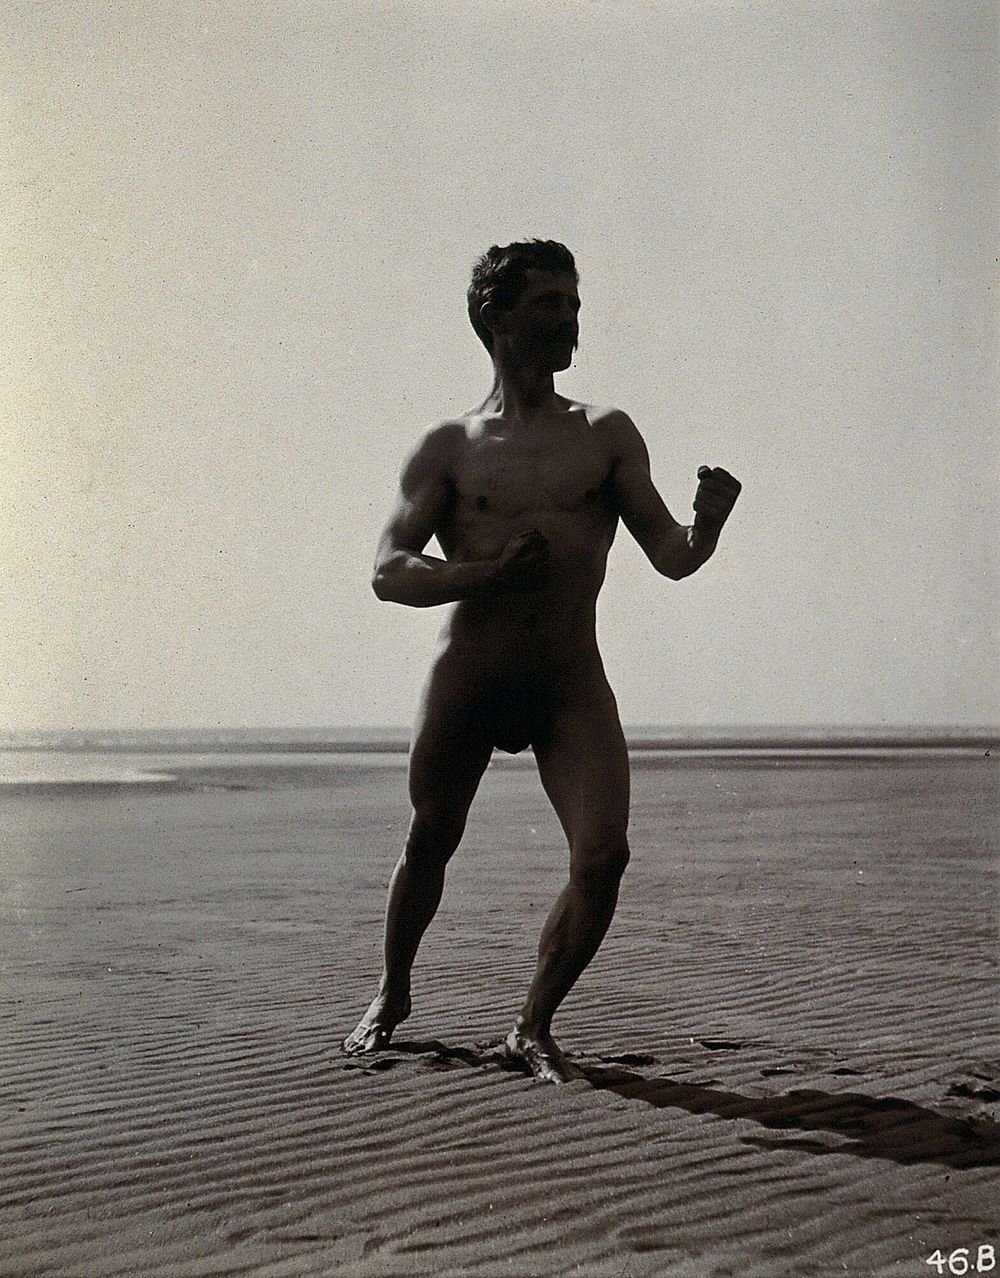 A man posing naked in a boxing stance with his fists raised, on a deserted beach.